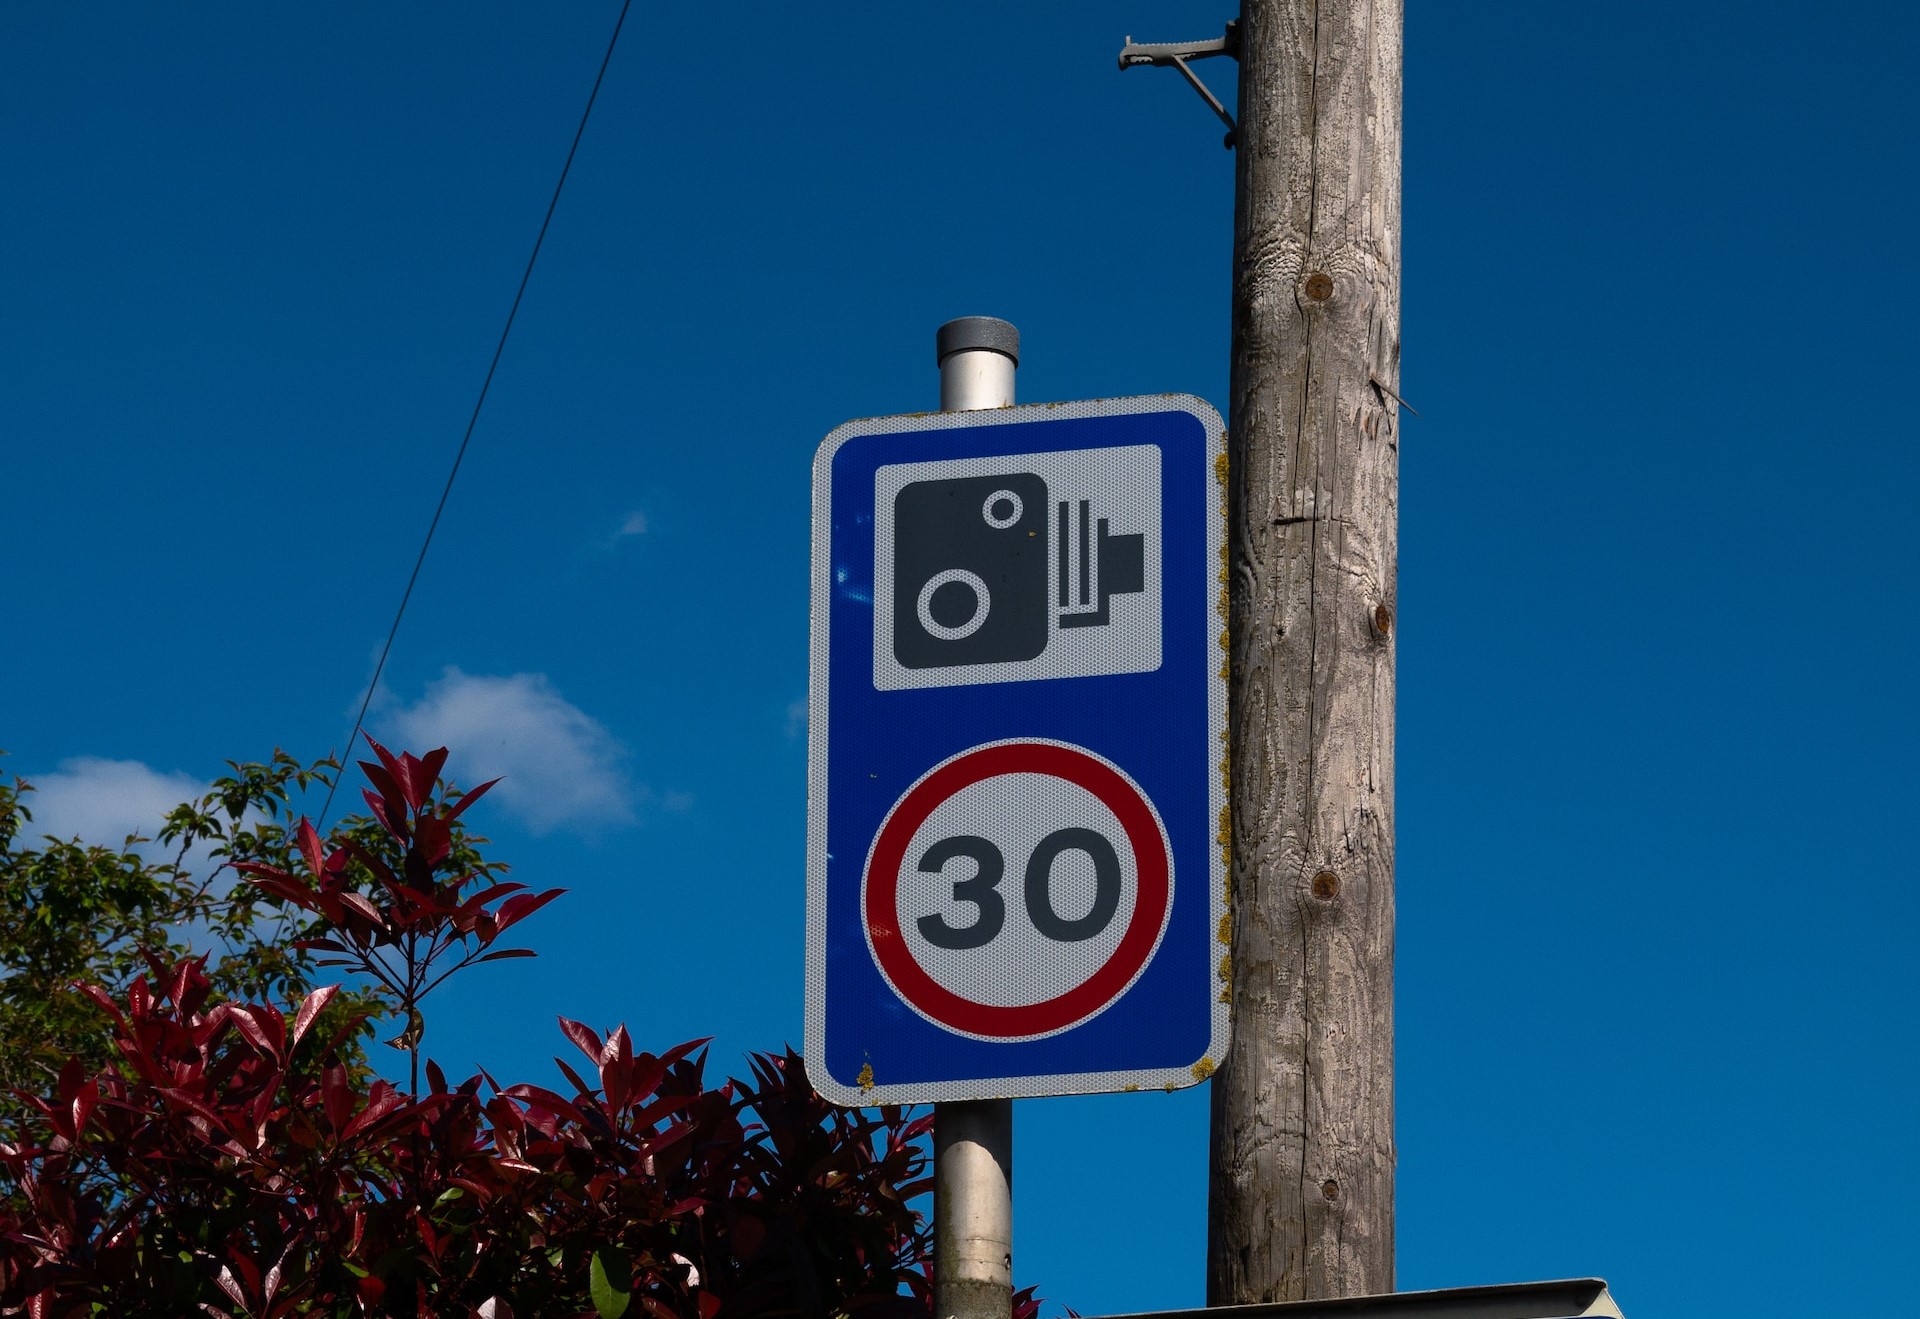 A 30 speed sign